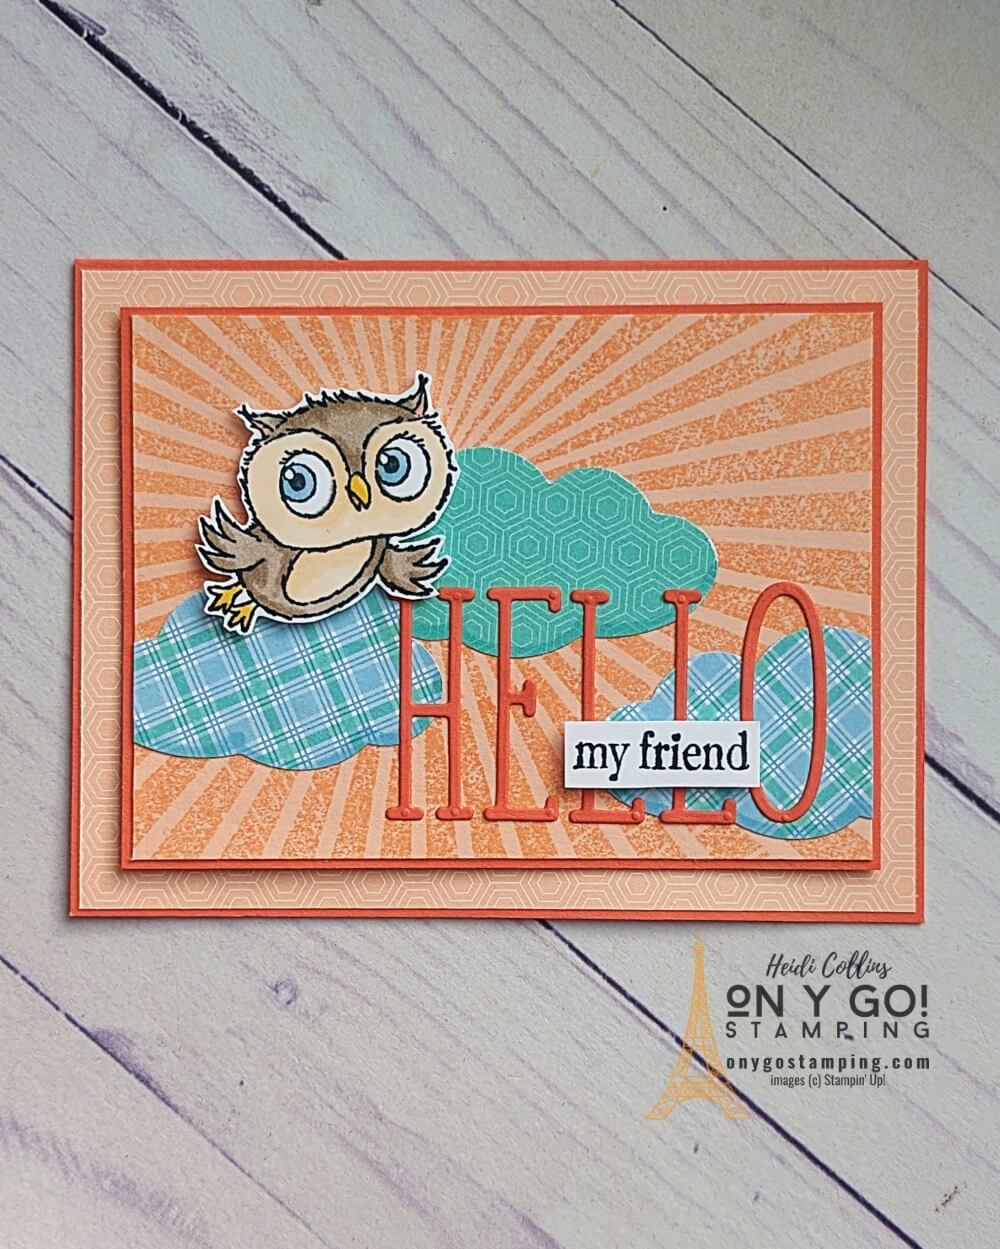 Send a handmade card to a friend to say hello with the Adorable Owls stamp set from Stampin' Up! These stamps will be available for FREE with a qualifying purchase during Sale-A-Bration 2023.